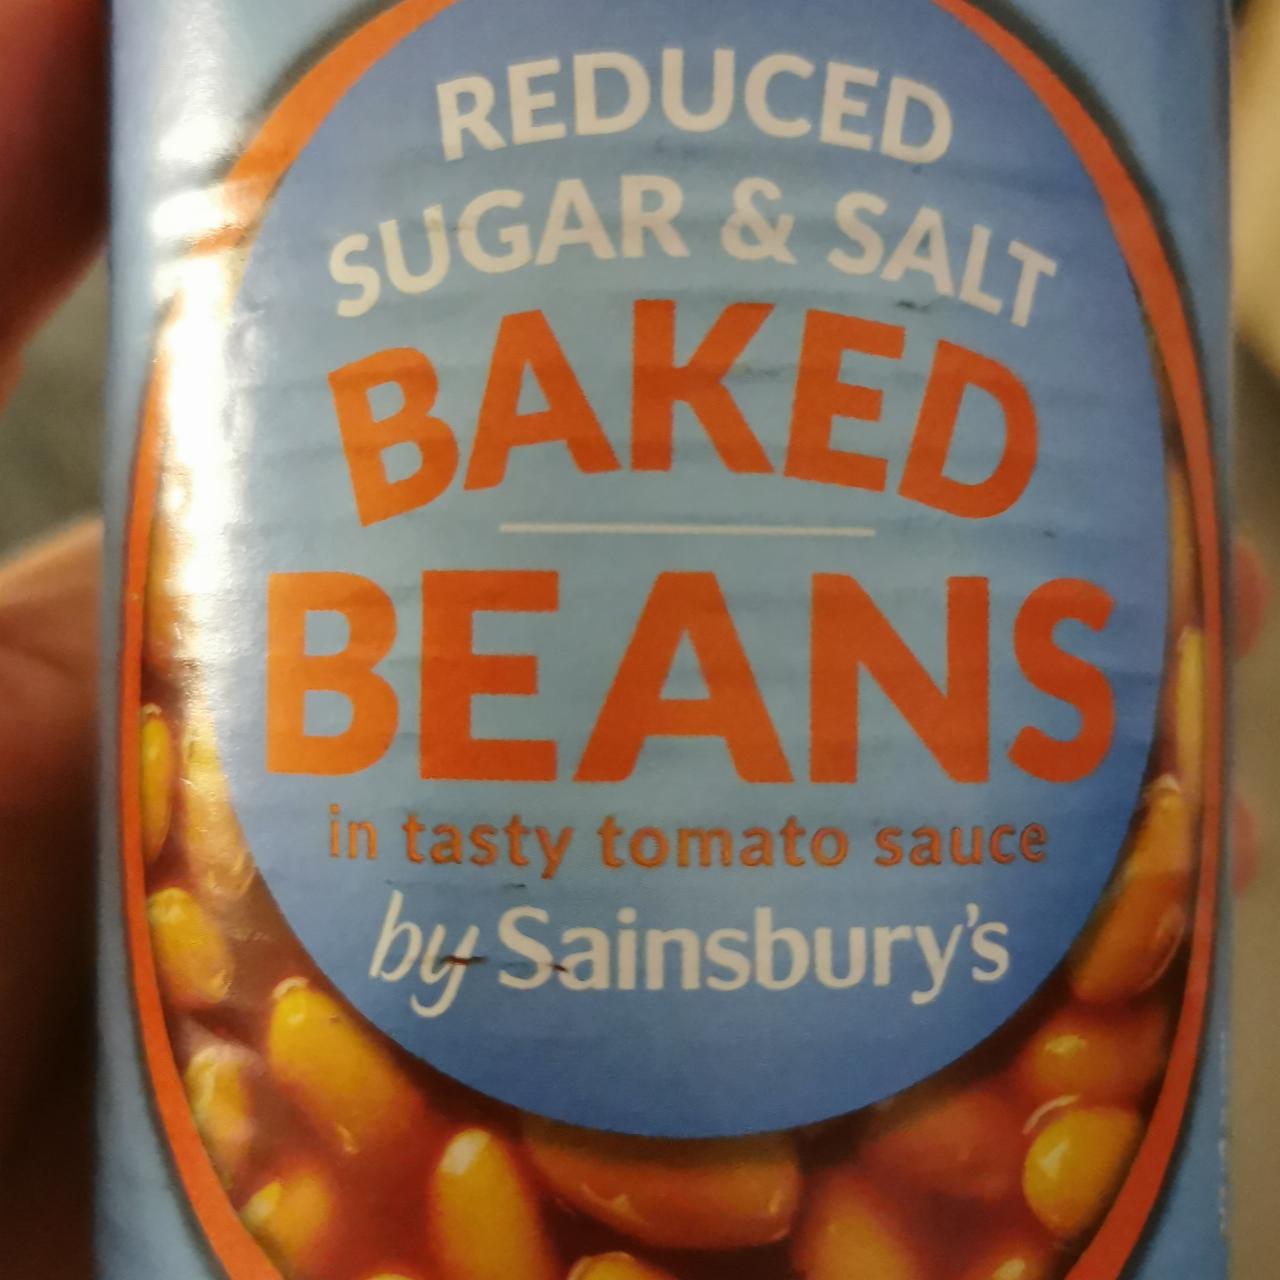 Fotografie - Baked Beans in tasty tomato sauce reduced sugar & salt by Sainsbury's